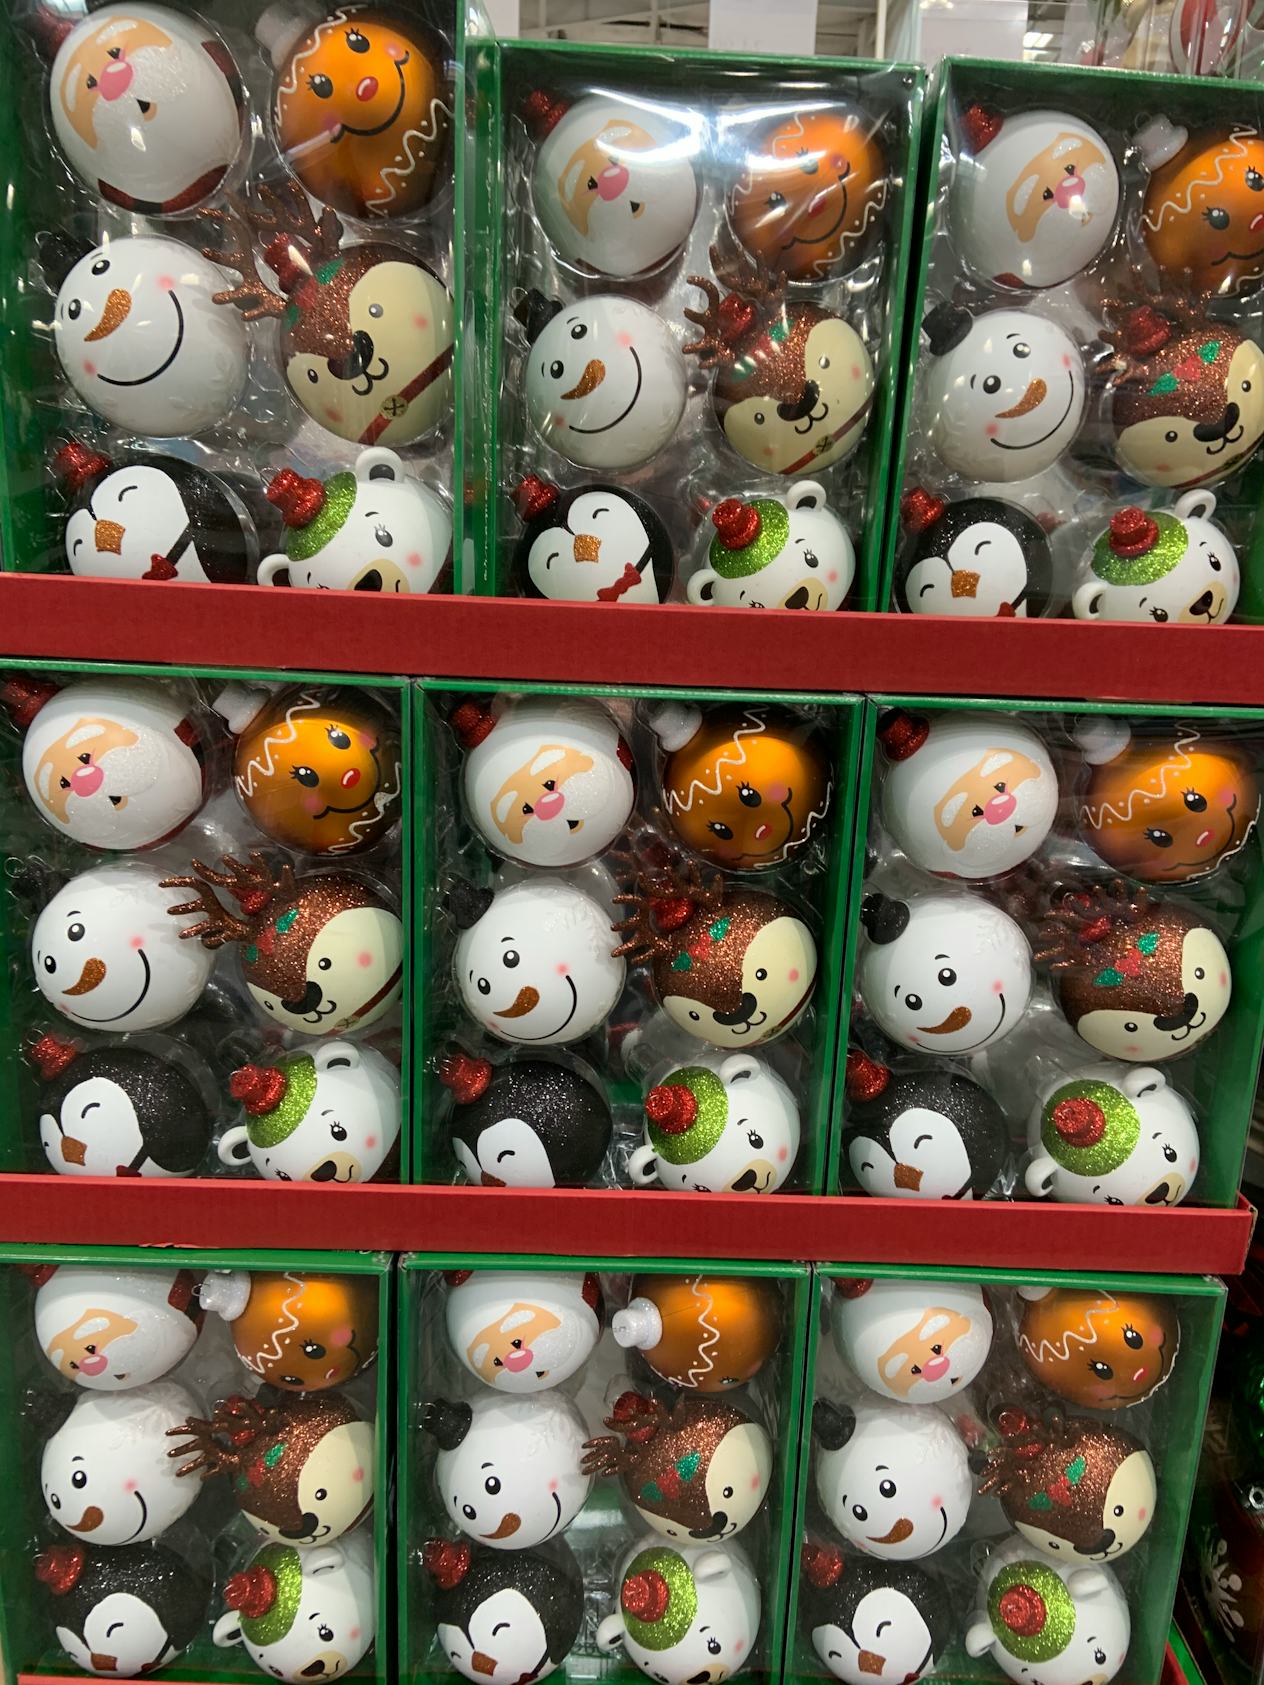 16 Best Christmas 2019 Decorations At Costco To Make Your Home Merry